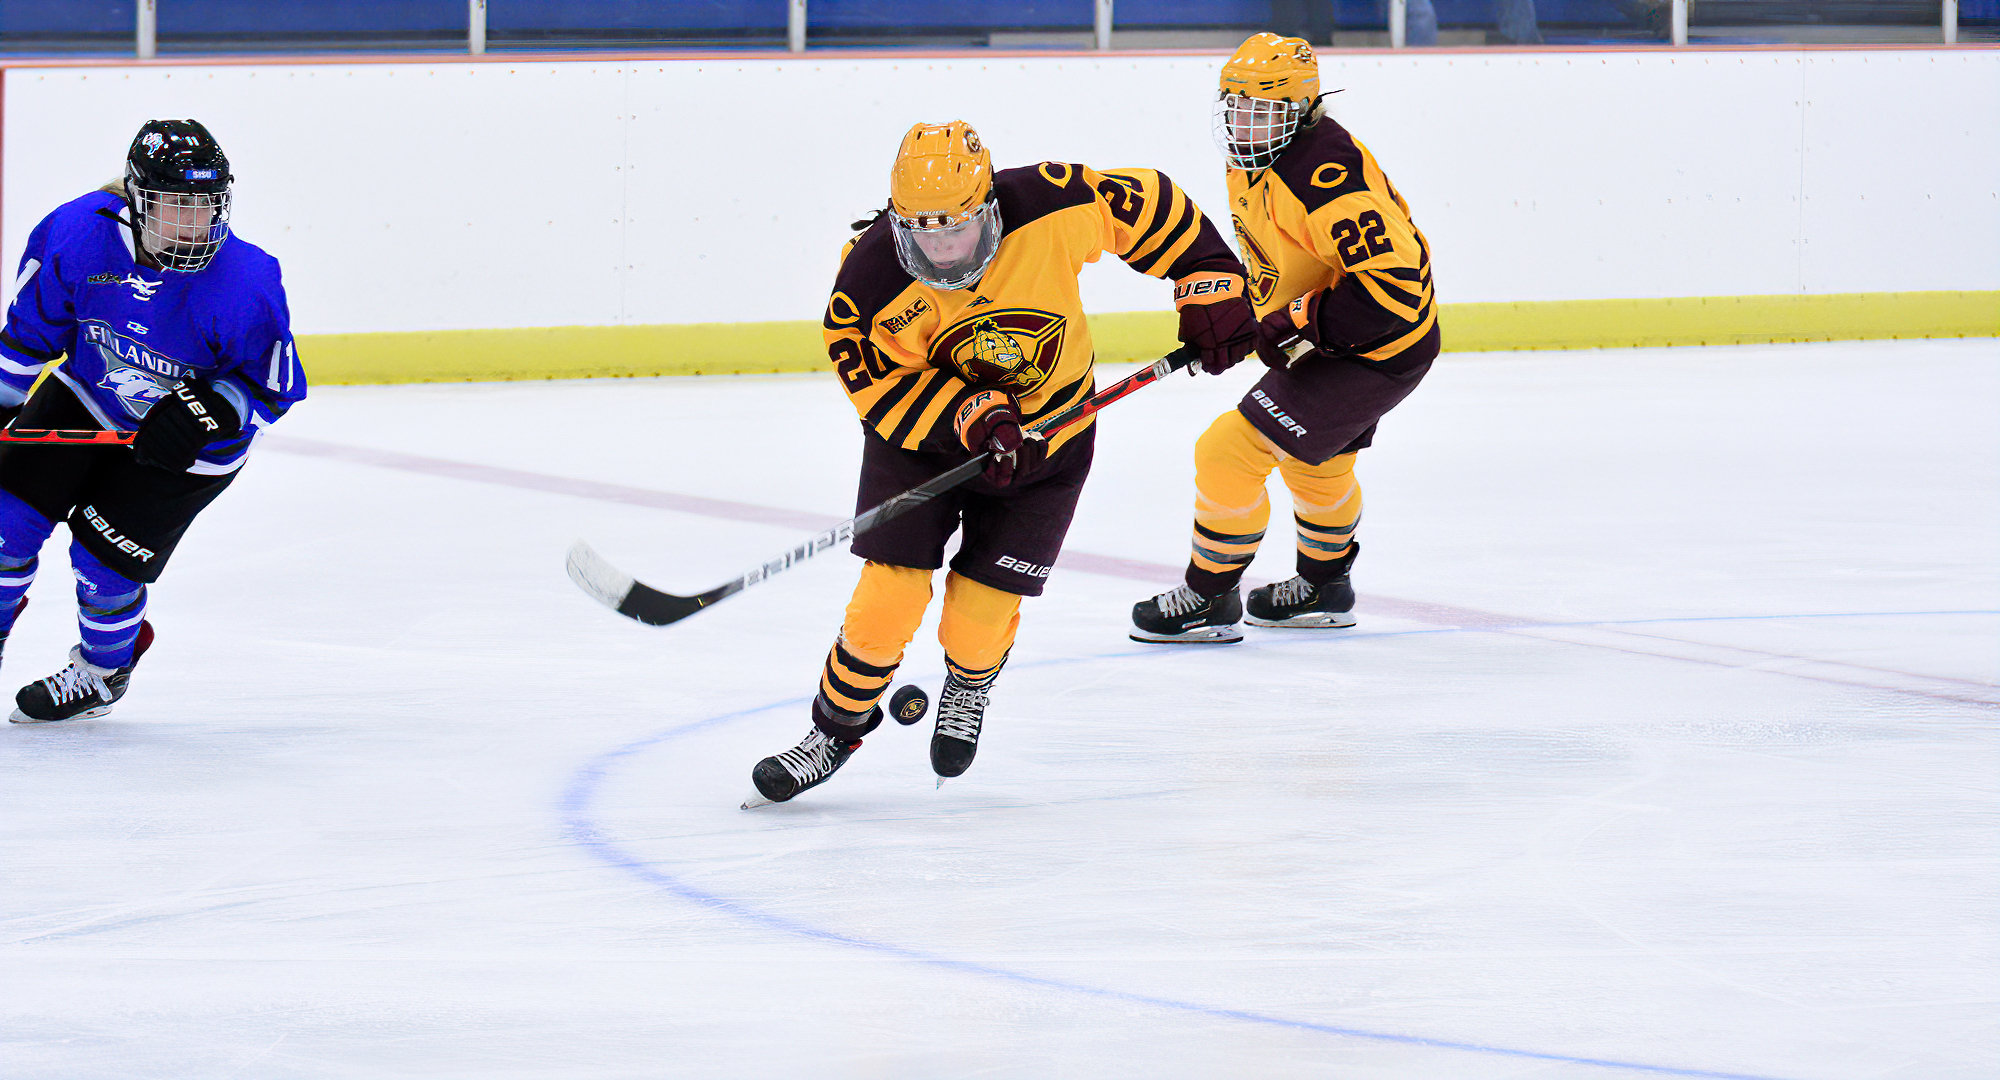 Maiah McCowan (#20) settles the puck in the middle of the ice as teammate Libby Hinrichs looks on. The two combined for the game-winning goal against Finlandia.